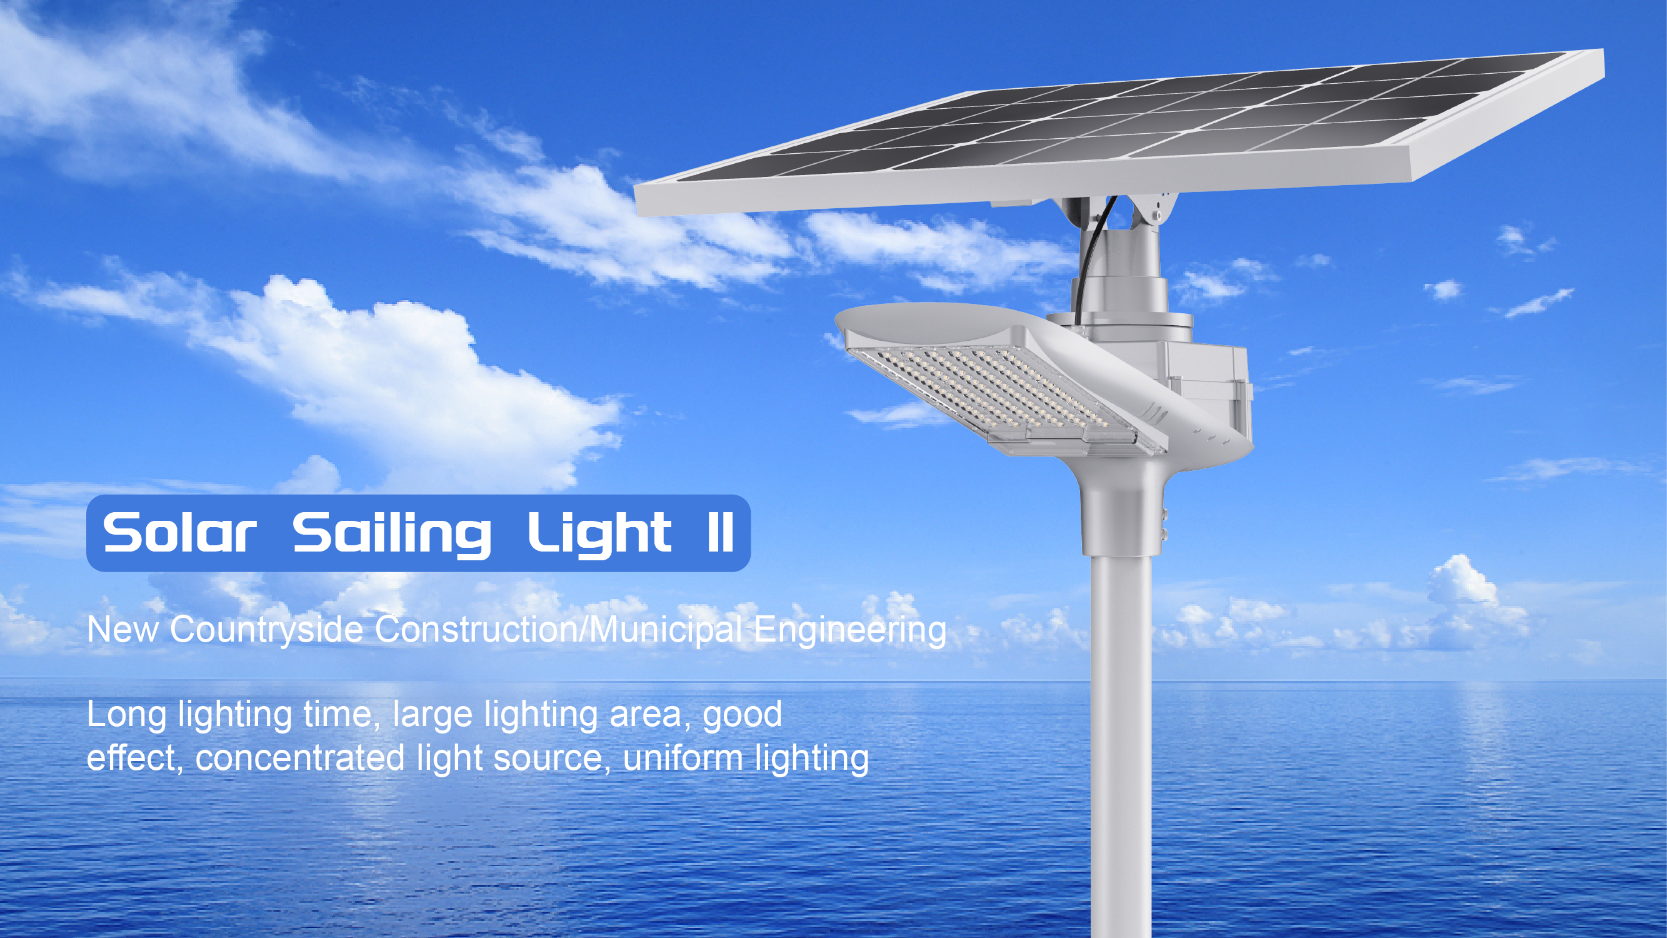 New product release | The second generation of solar sailing lights is launched!